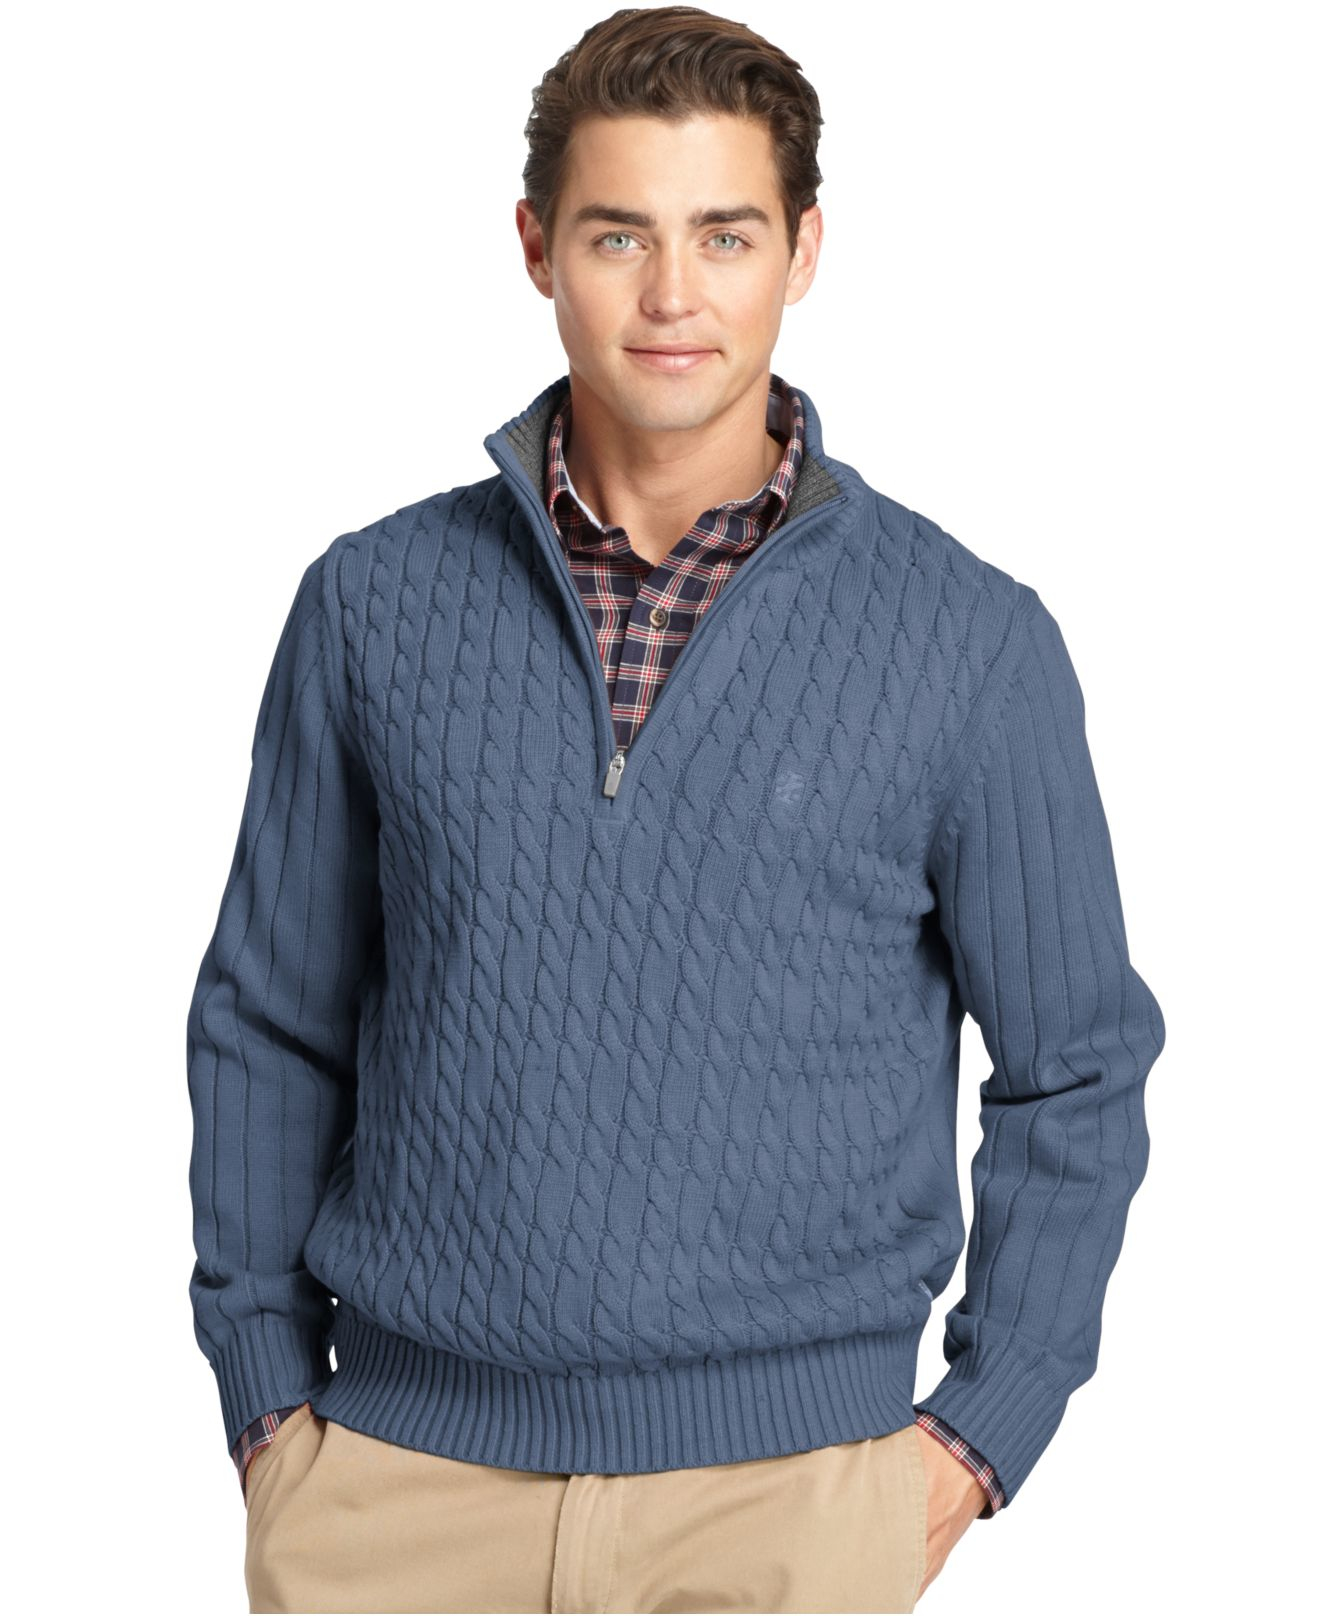 Lyst - Izod Big And Tall Cable-knit Quarter-zip Sweater in ...